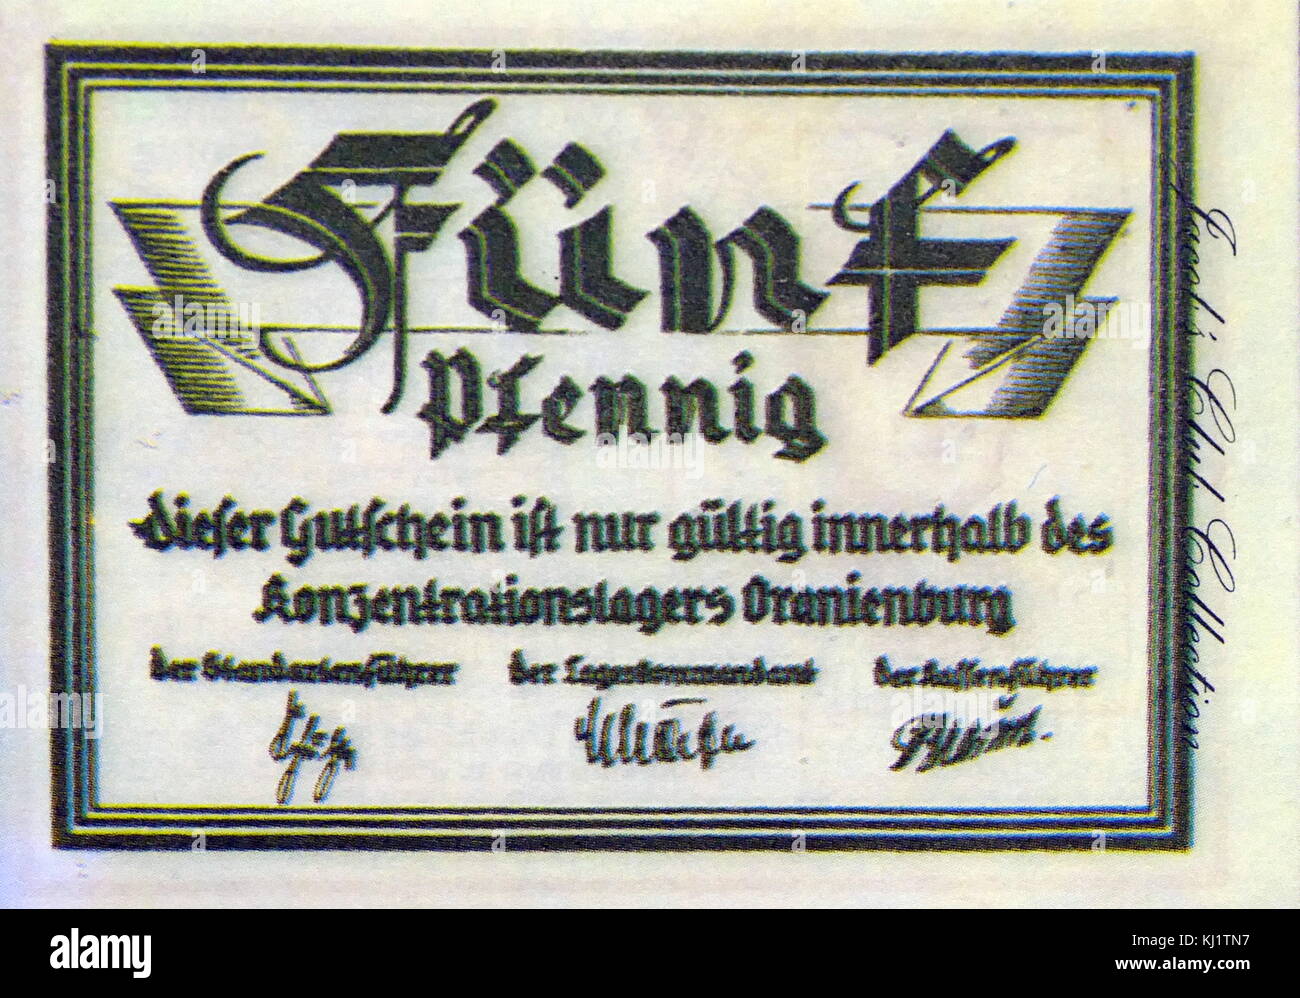 Oranienburg Concentration Camp 5 pfennig banknote. At this camp the Germans assembled all the skilled forgers from the prisons of Europe to forge British notes Stock Photo